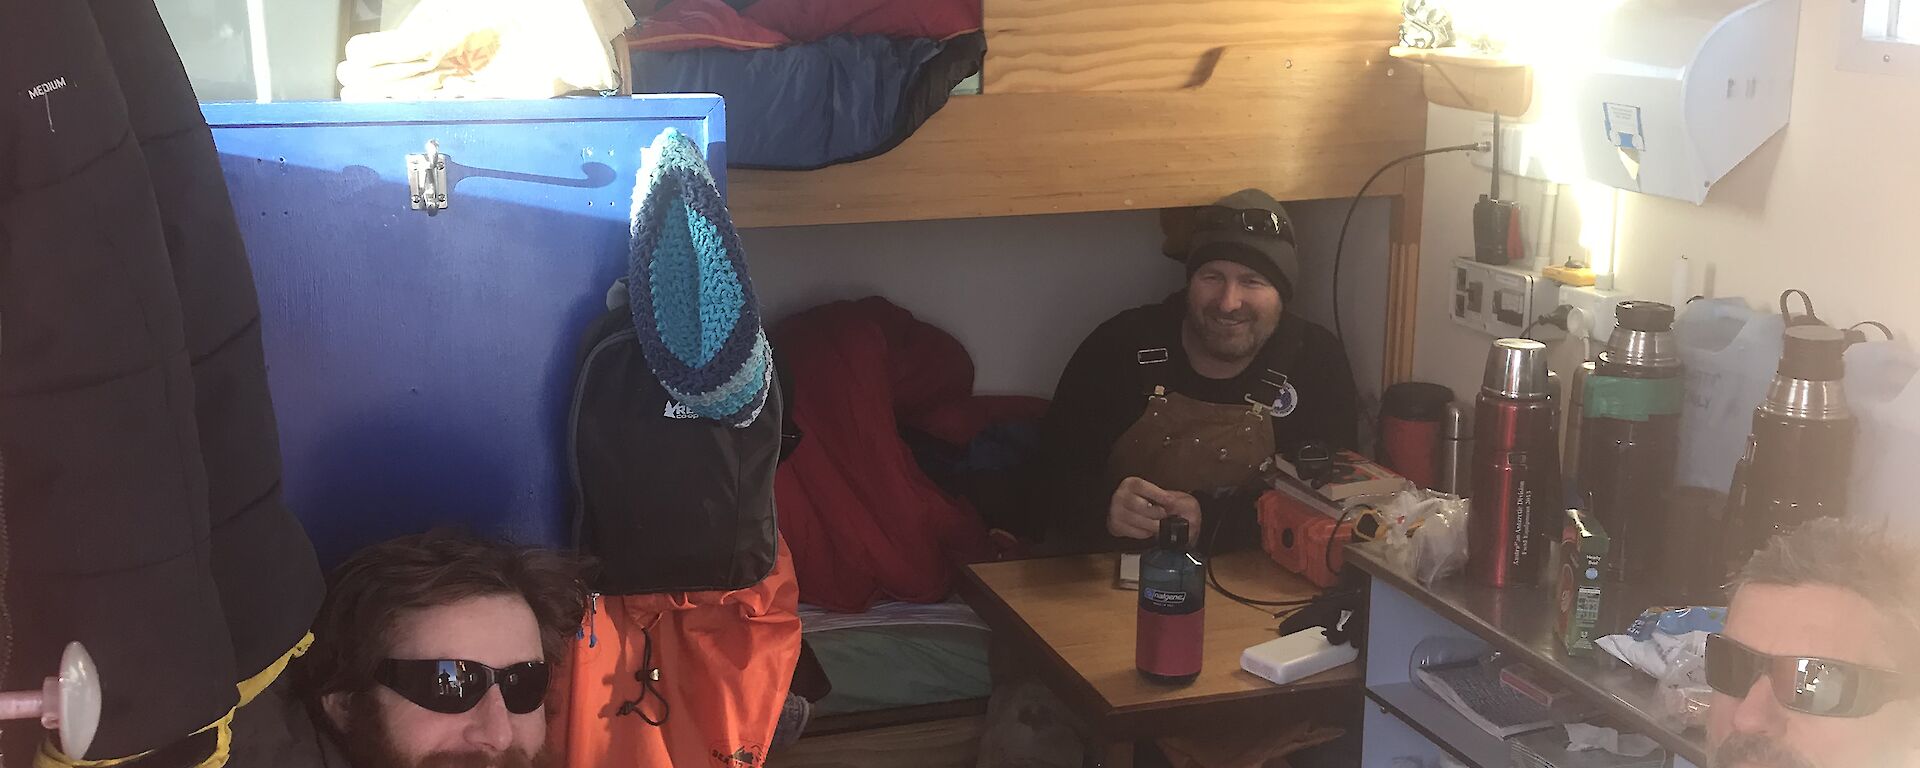 Four expeditioners inside a small hut sitting eating.  Bunk style beds in background.